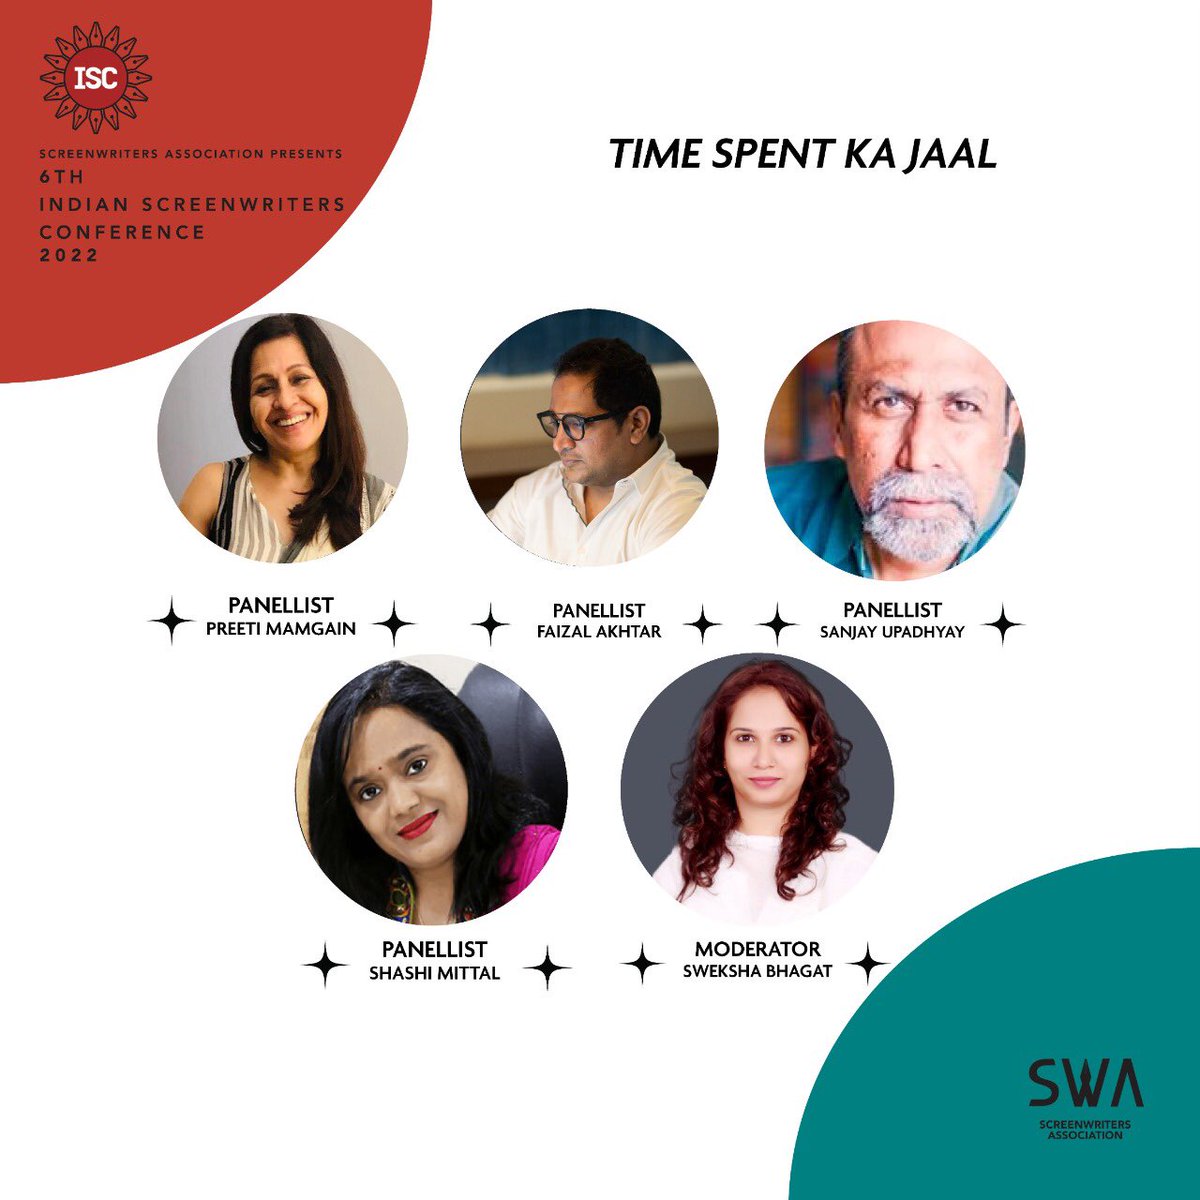 **SESSION ALERT** SWA brings to you the 6th edition of India’s biggest event for Screenwriters - INDIAN SCREENWRITERS CONFERENCE! “TIME SPENT KA JAAL”